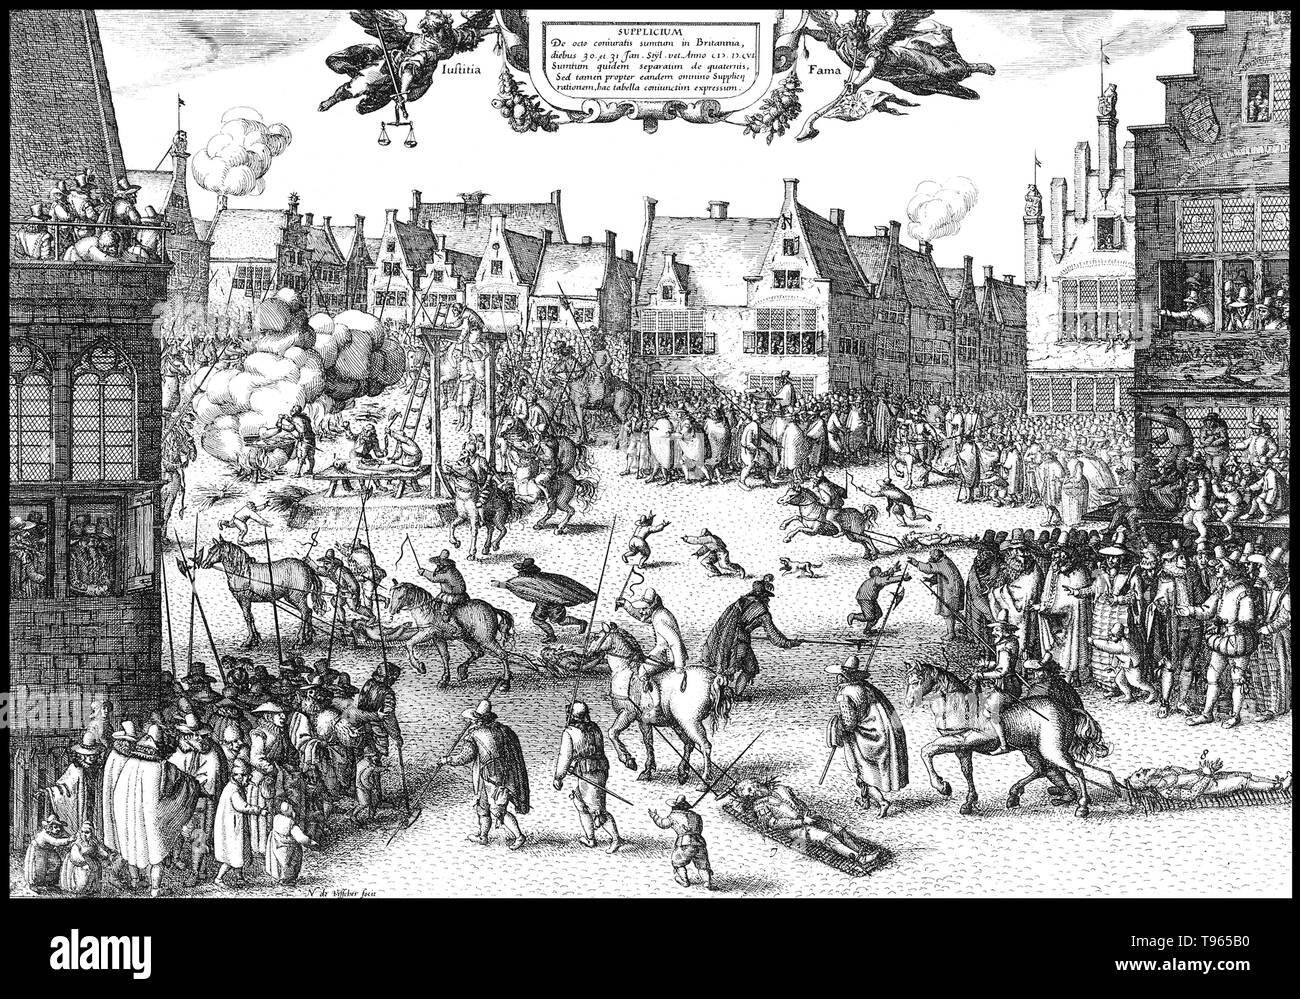 On a cold January 30, 1606, Everard Digby, Robert Wintour, John Grant, and Thomas Bates, were tied to hurdles (wooden panels) and dragged through the crowded streets of London to St Paul's Churchyard. Digby, the first to mount the scaffold, asked the spectators for forgiveness, and refused the attentions of a Protestant clergyman. He was stripped of his clothing, and wearing only a shirt, climbed the ladder to place his head through the noose. Stock Photo